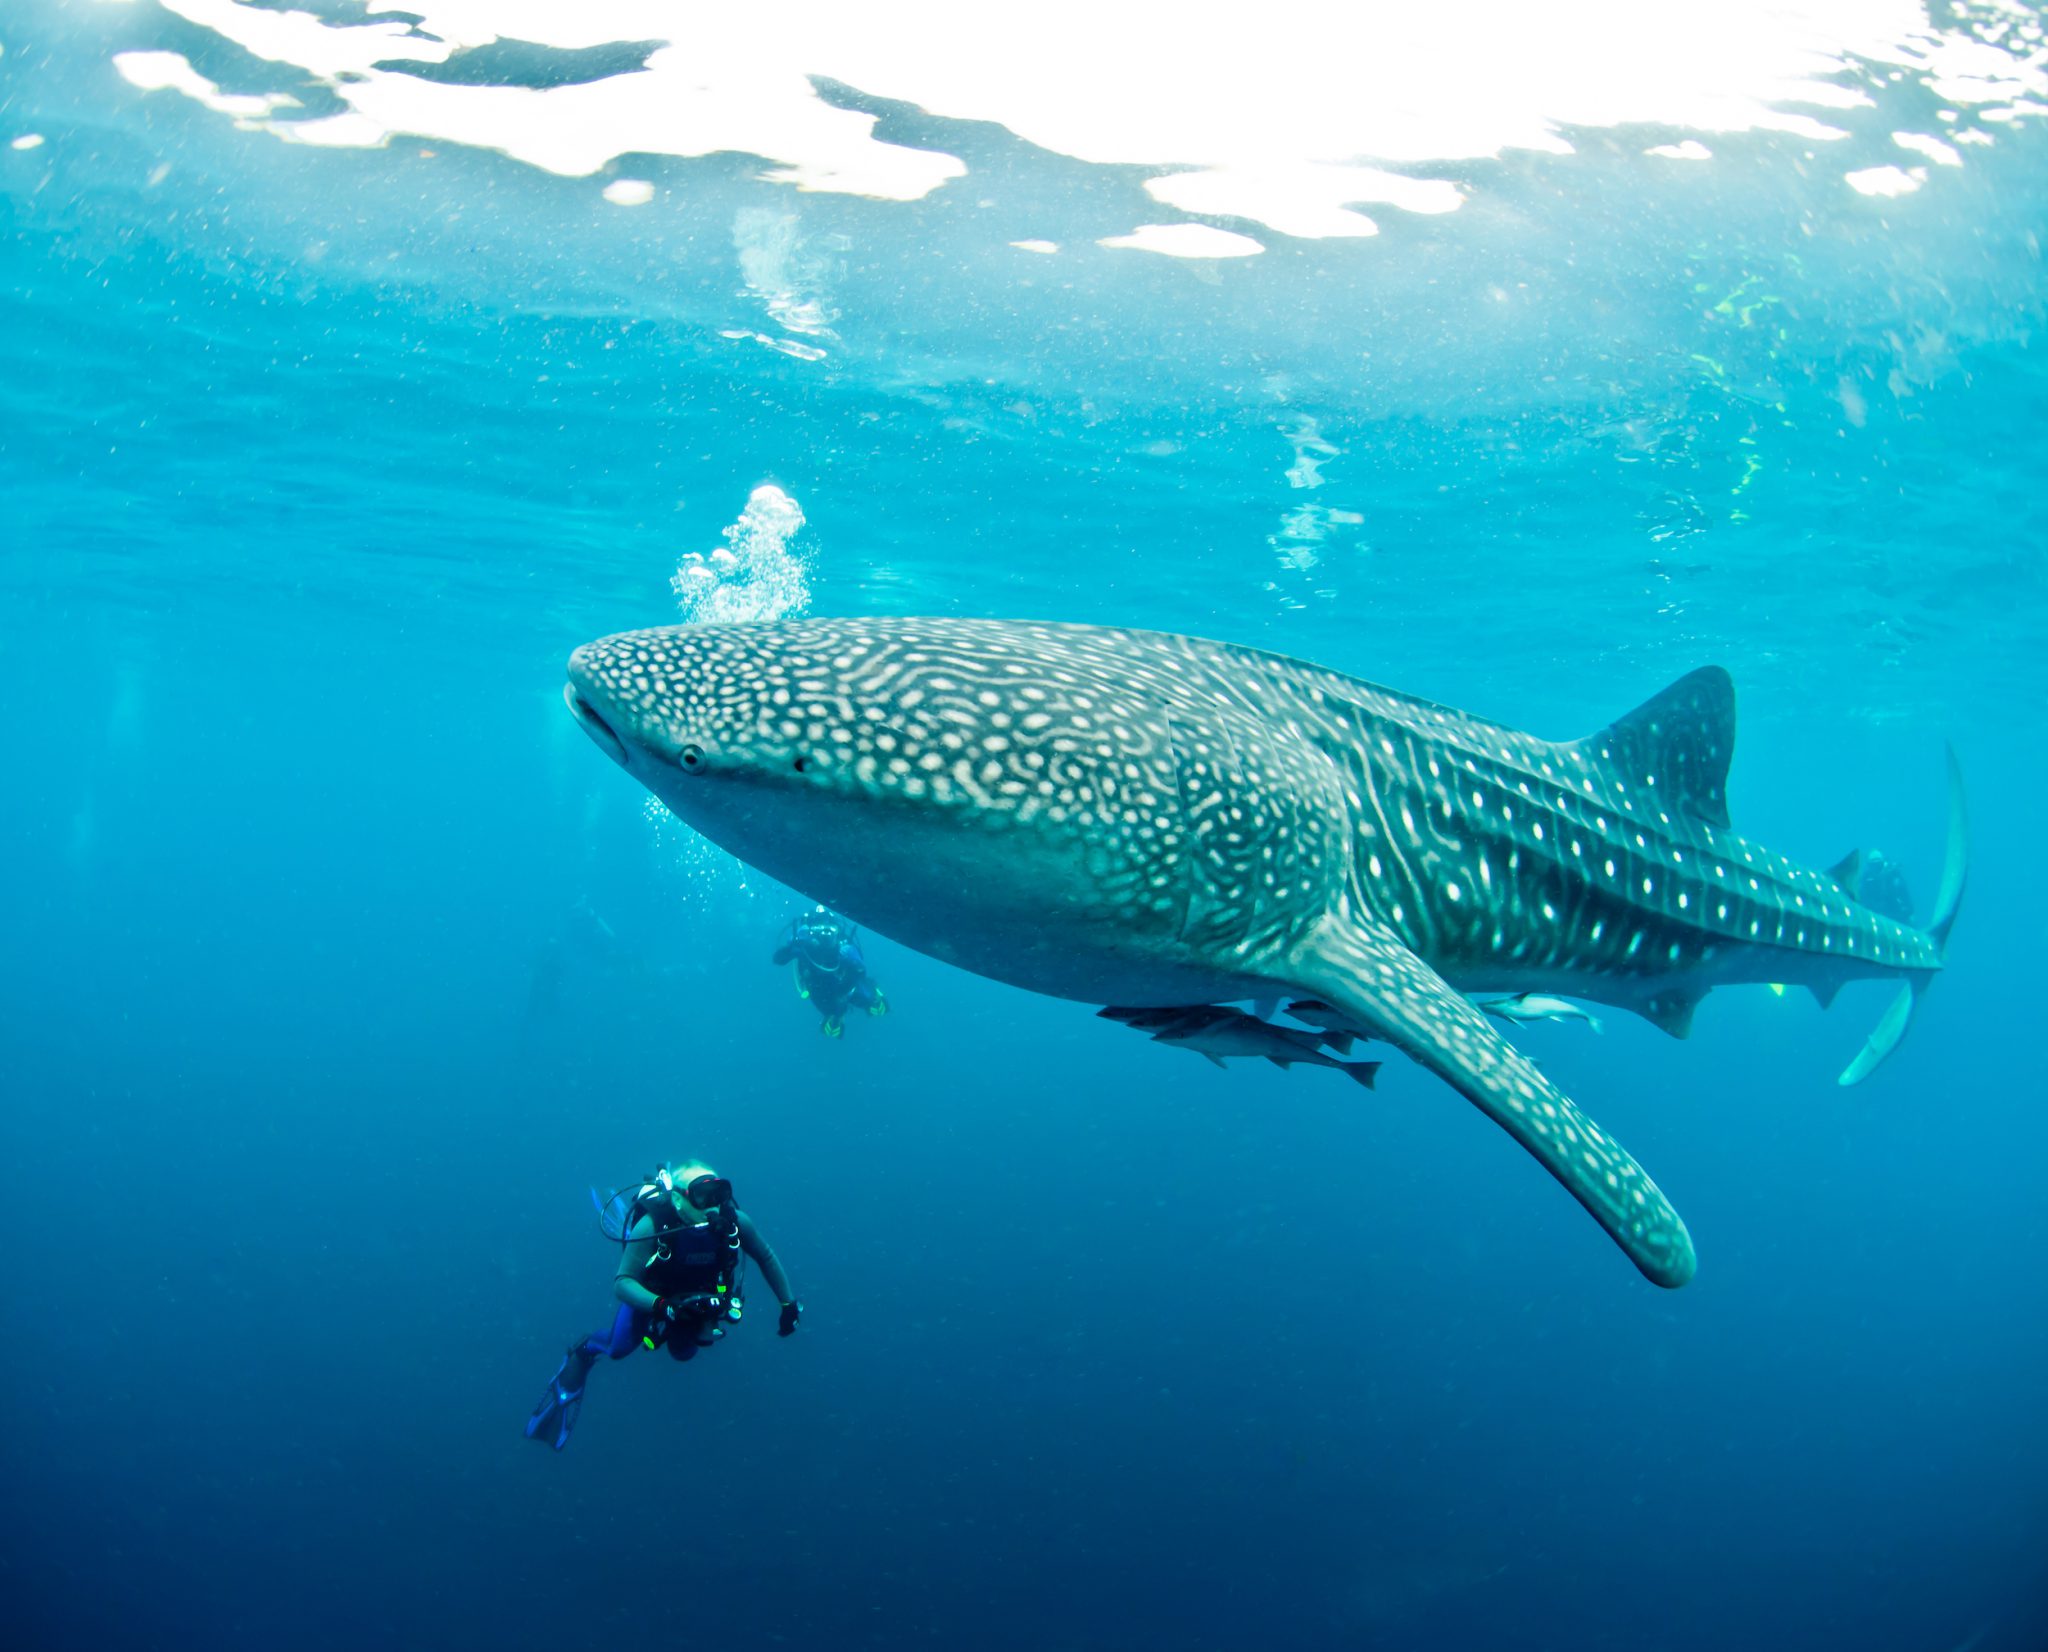 A buddy pair taking in the size of an ocean giant while scuba diving with whale sharks in Indonesia